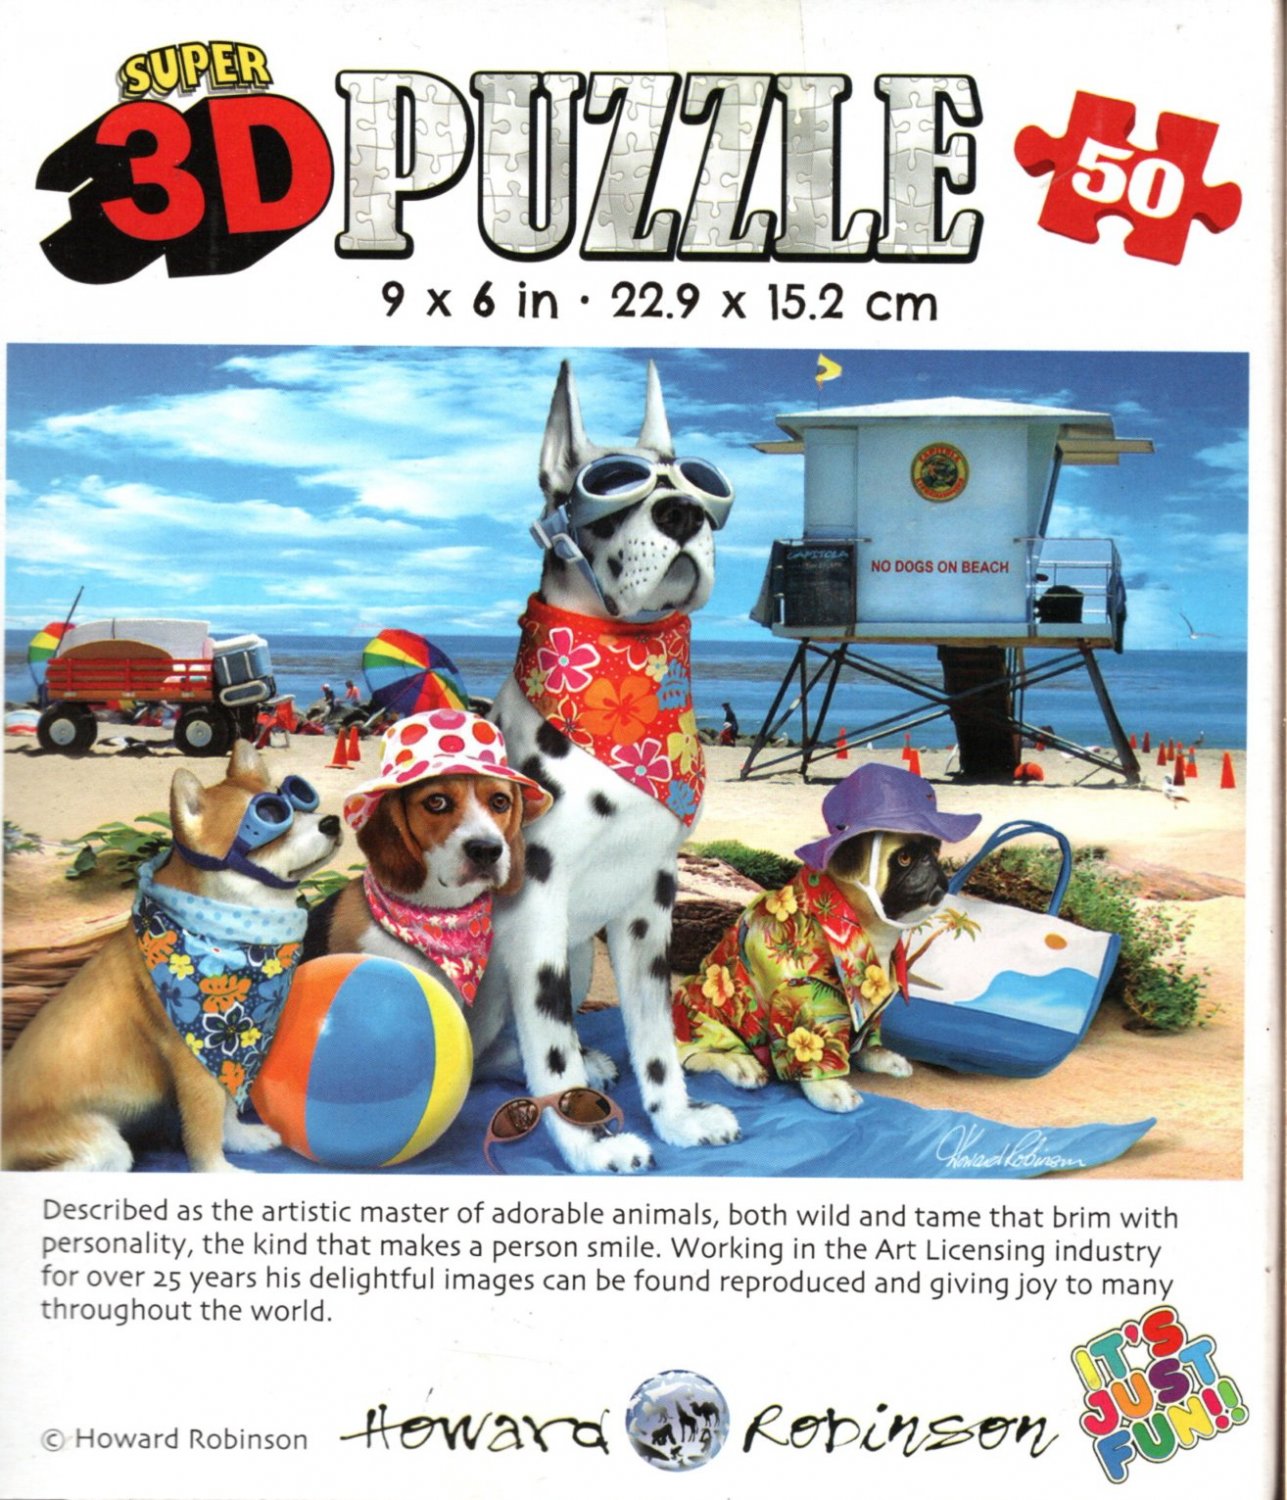 Stay Cool - Super 3D 50 Pieces Jigsaw Puzzle